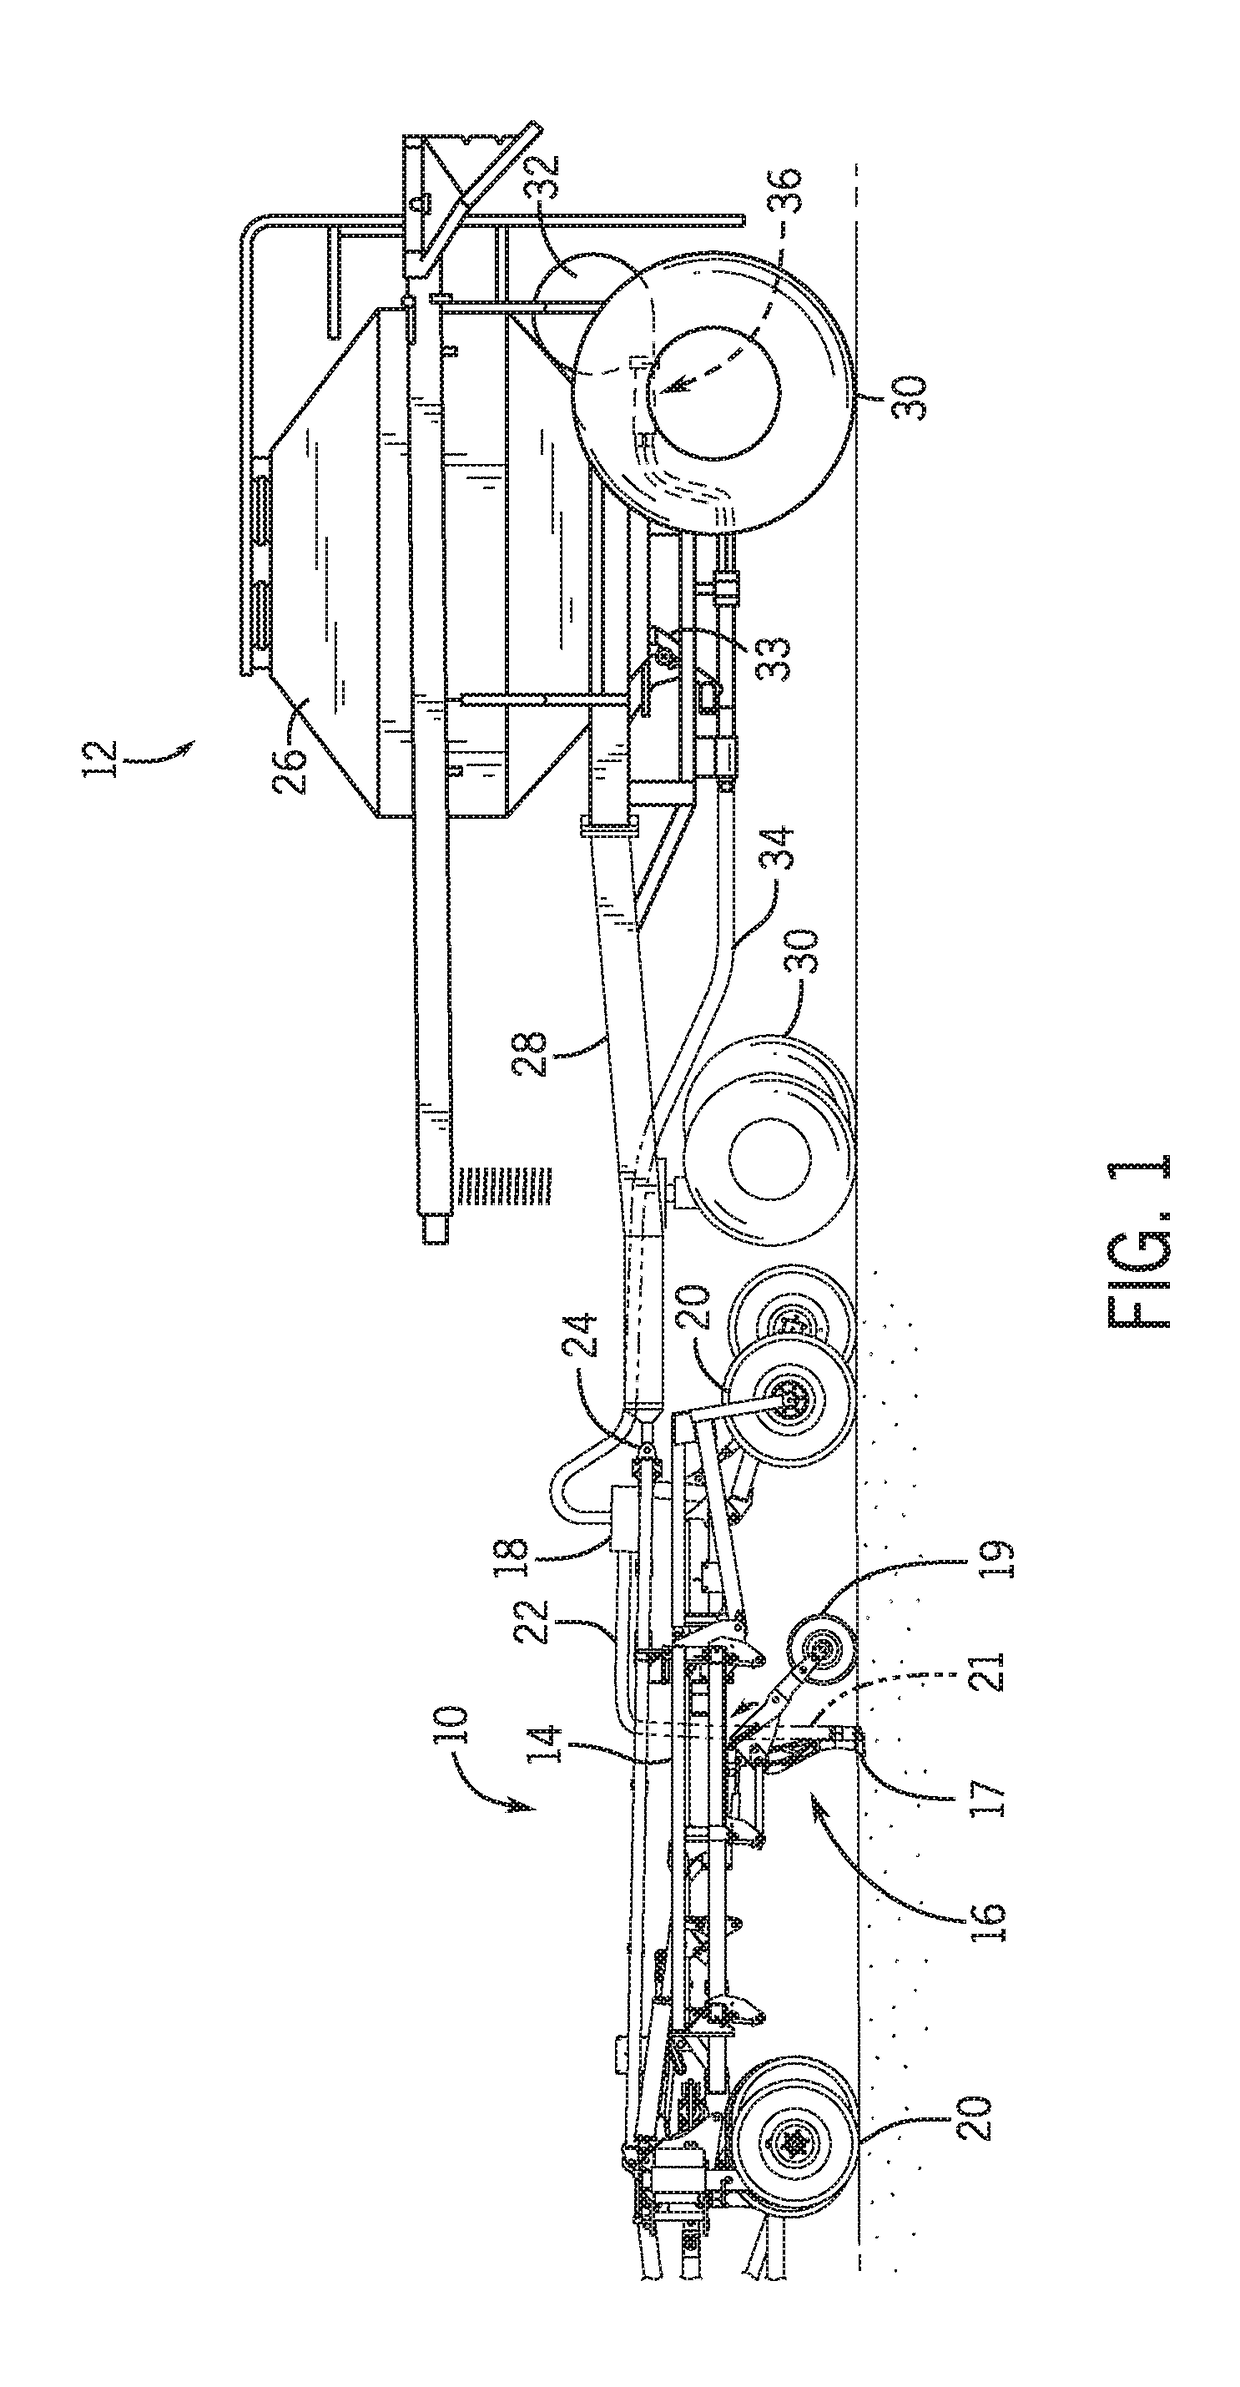 Port interface for a pneumatic distribution system